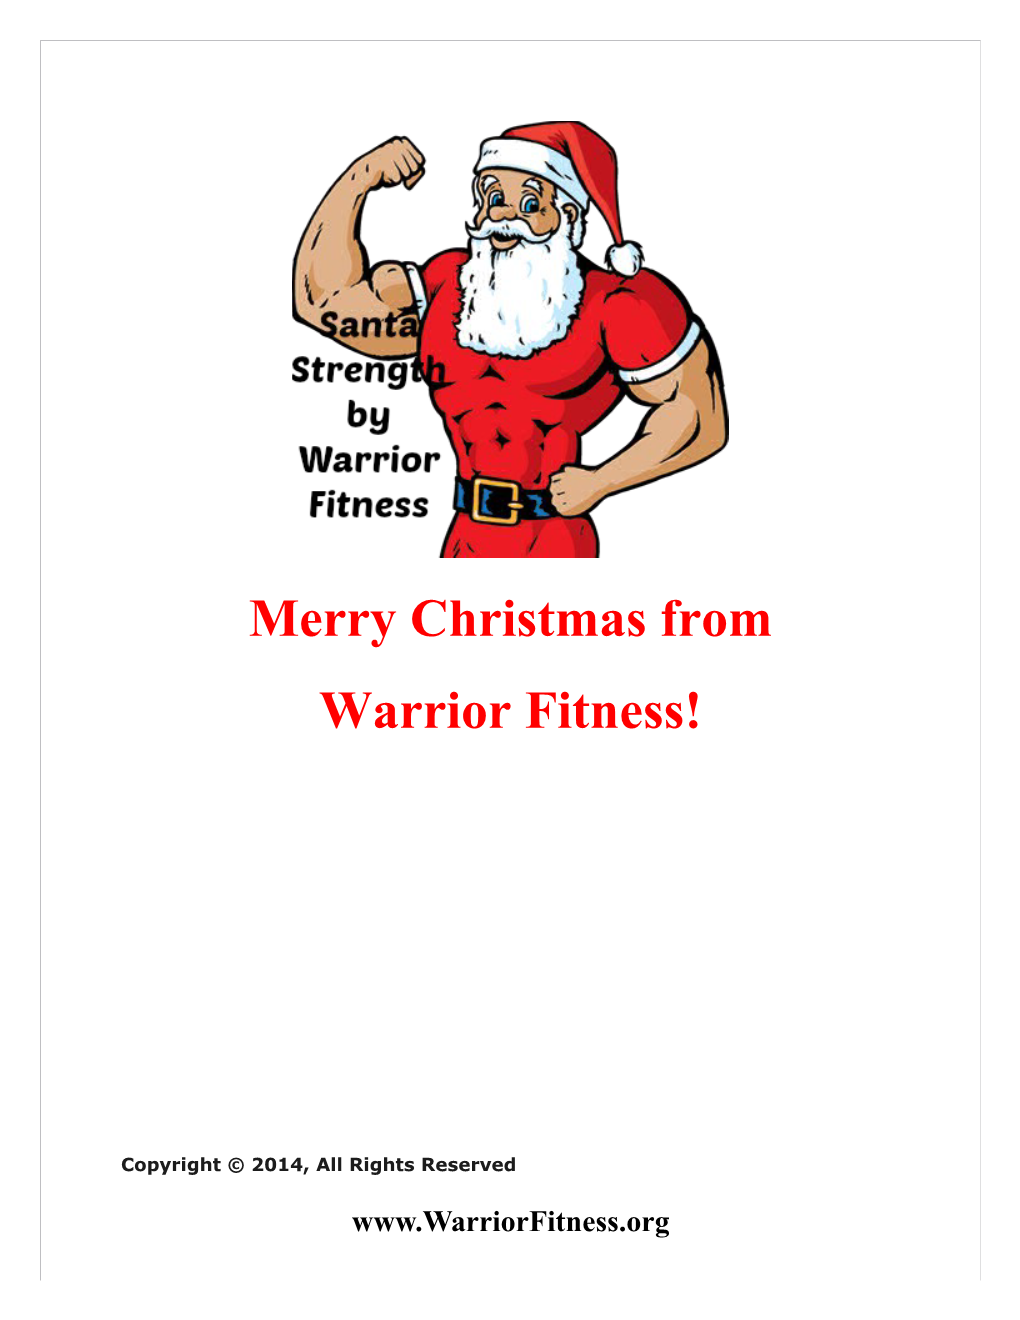 Merry Christmas from Warrior Fitness!